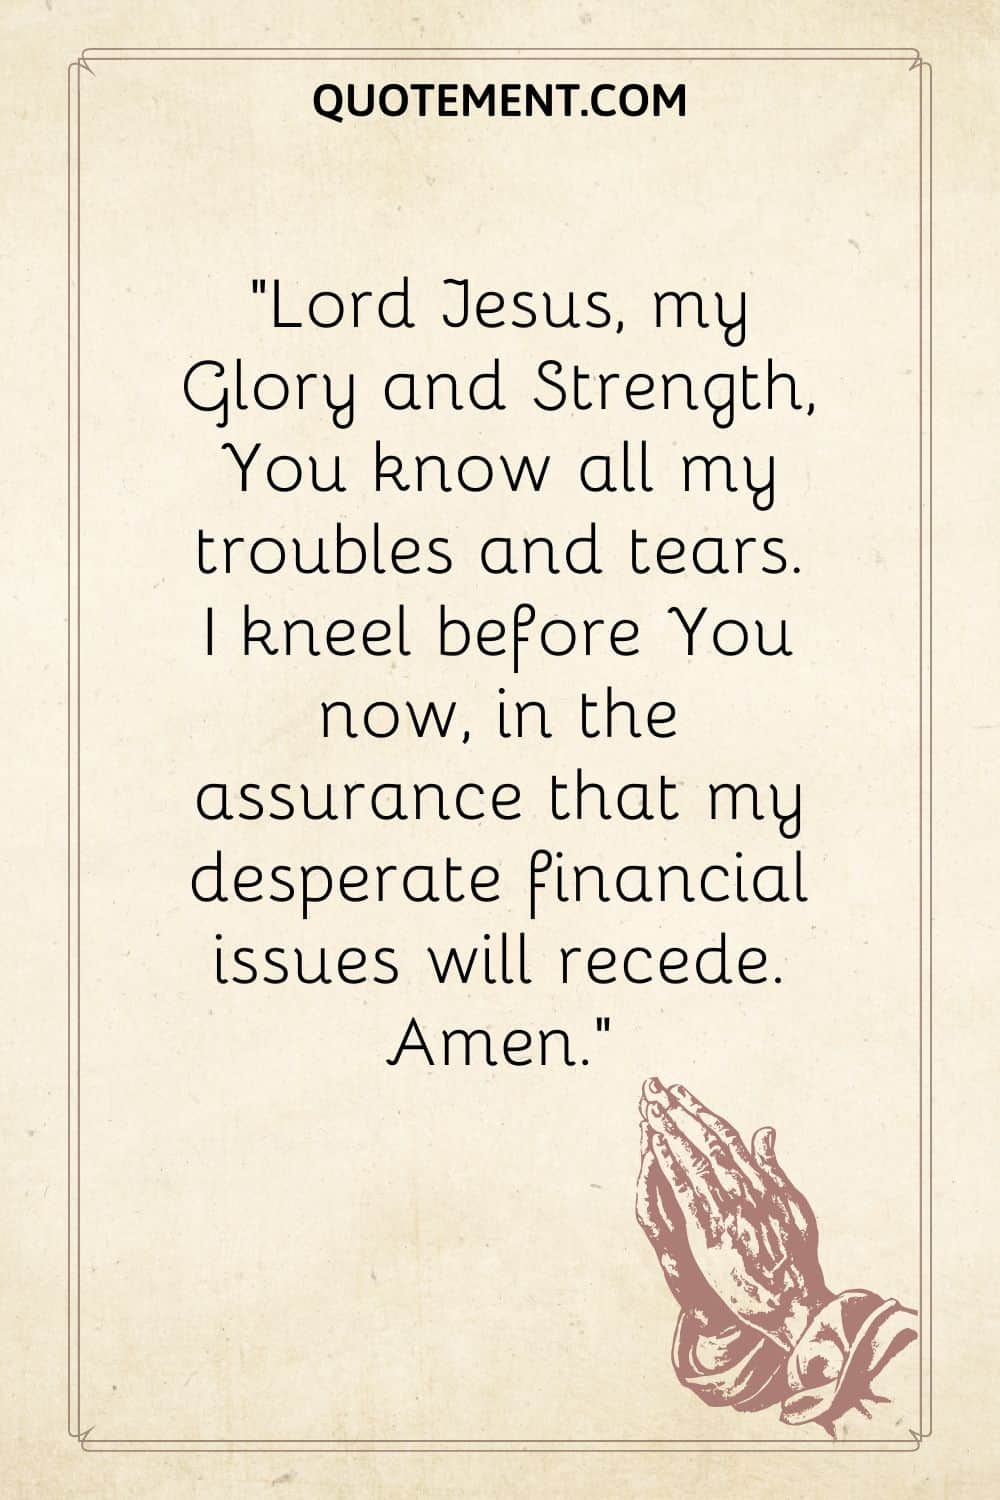 Lord Jesus, my Glory and Strength, You know all my troubles and tears